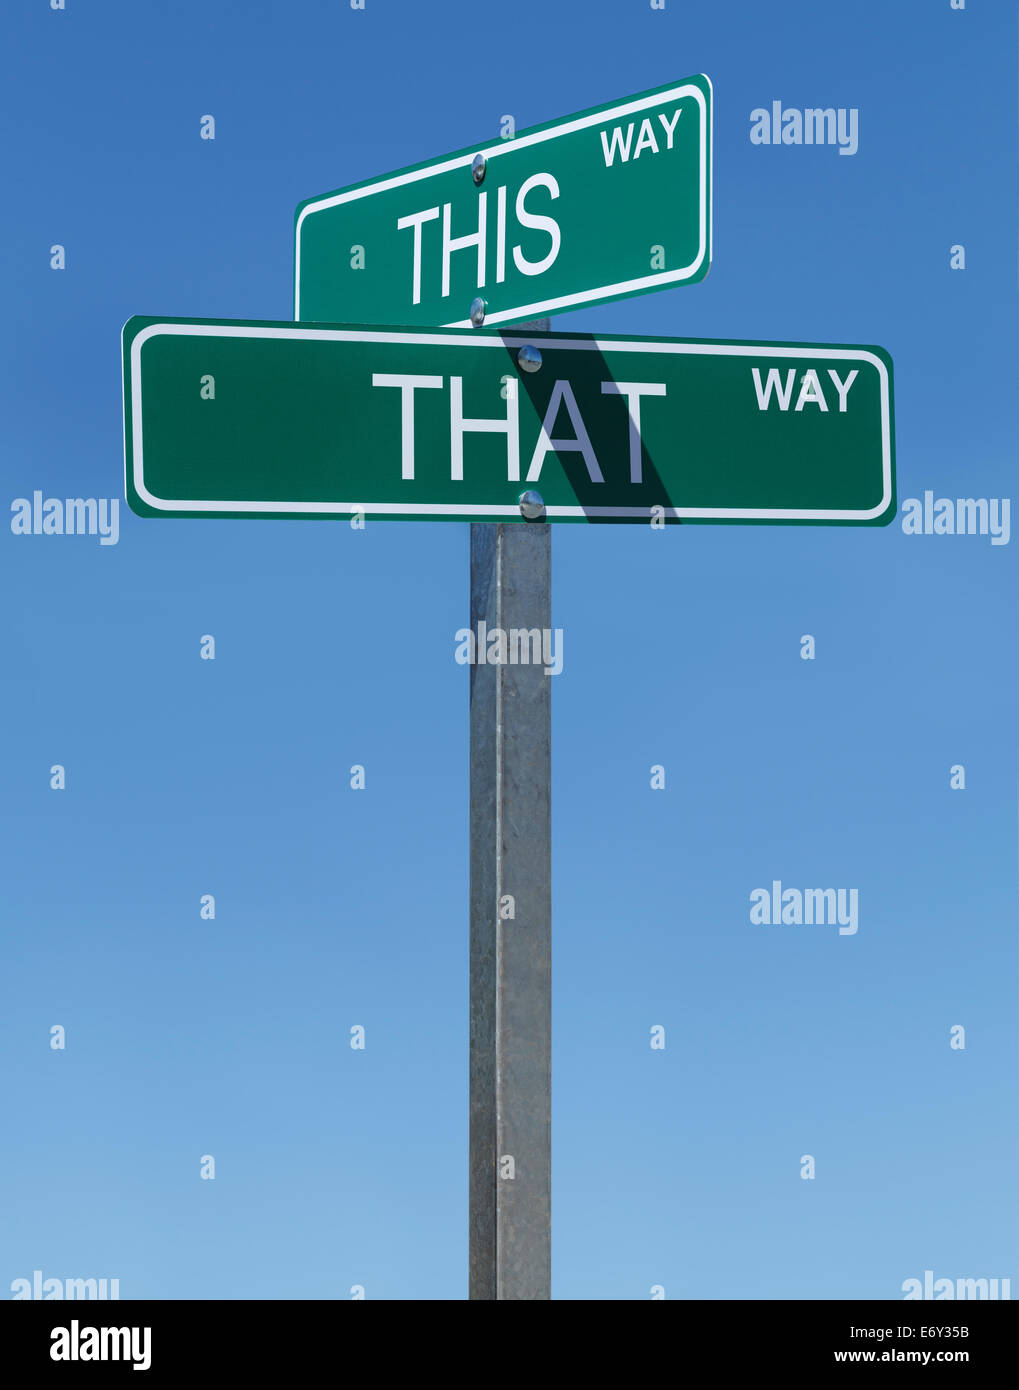 This Way and That Way Street Signs with Blue Sky Background. Stock Photo